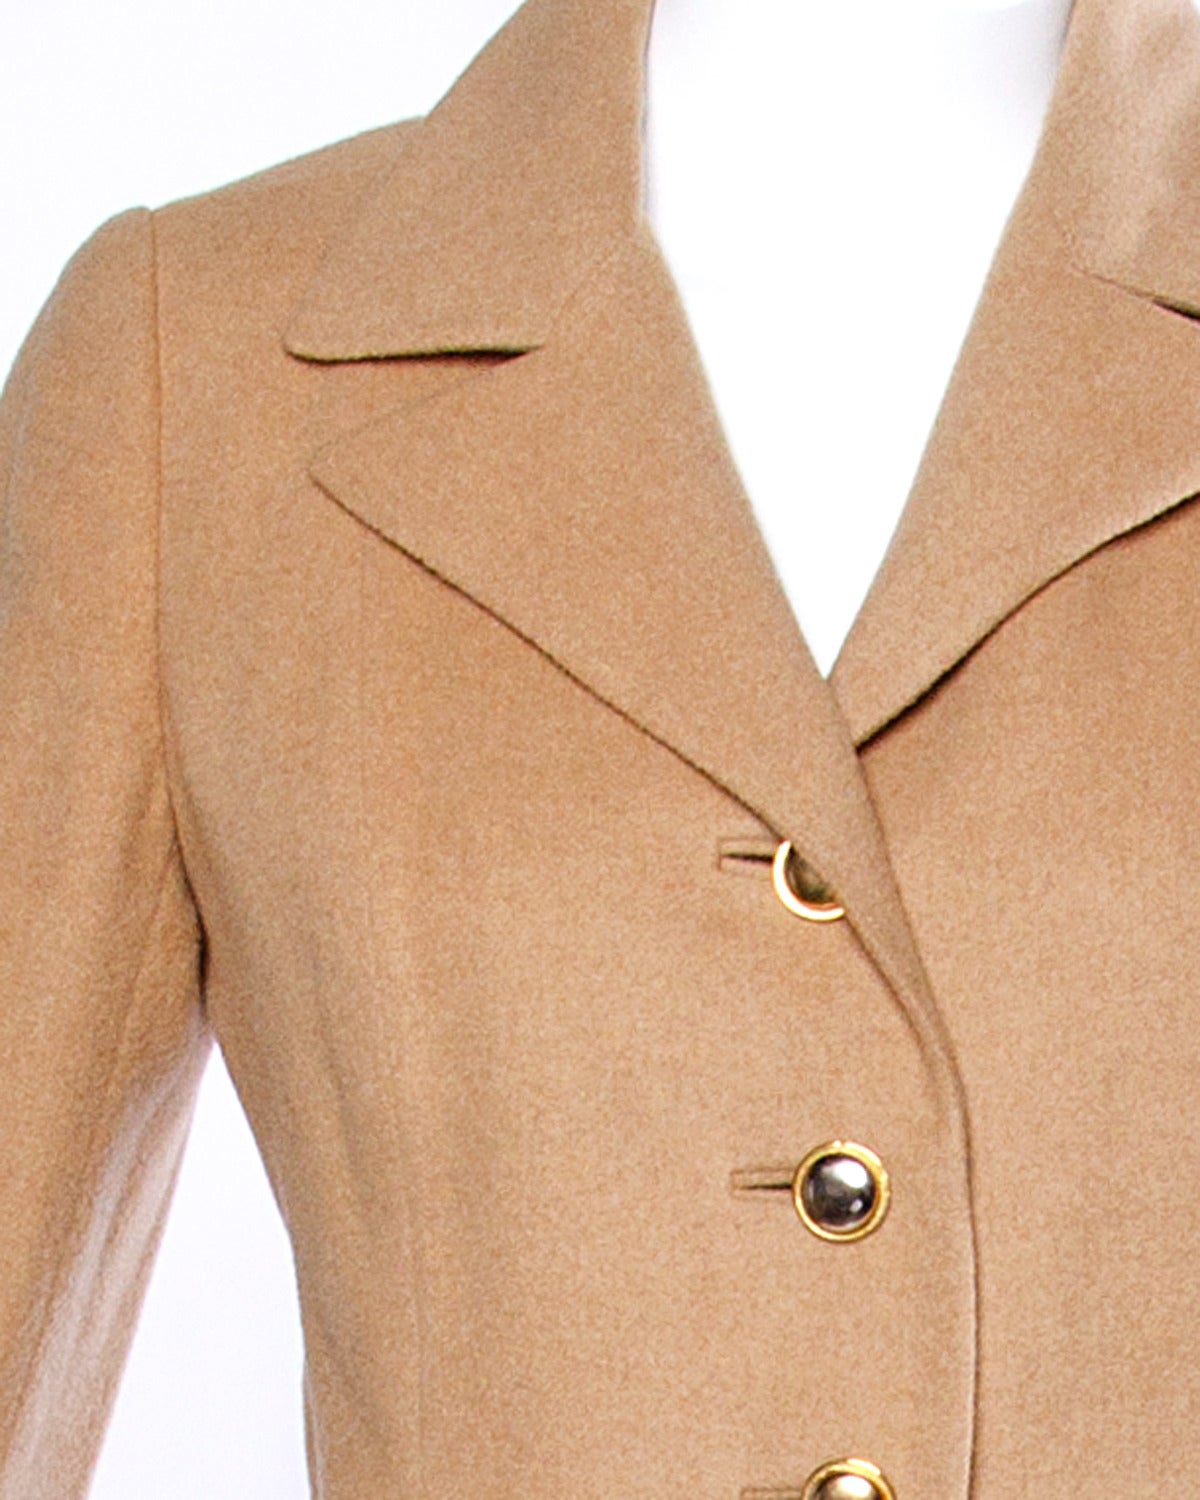 Unique matching jacket and skirt suit by Frances Heffernan with heavy duty goldtone hardware in 100% camel hair. The jacket buttons up the front and features custom tailoring and notched lapels. The skirt snaps into place and is finished by a heavy